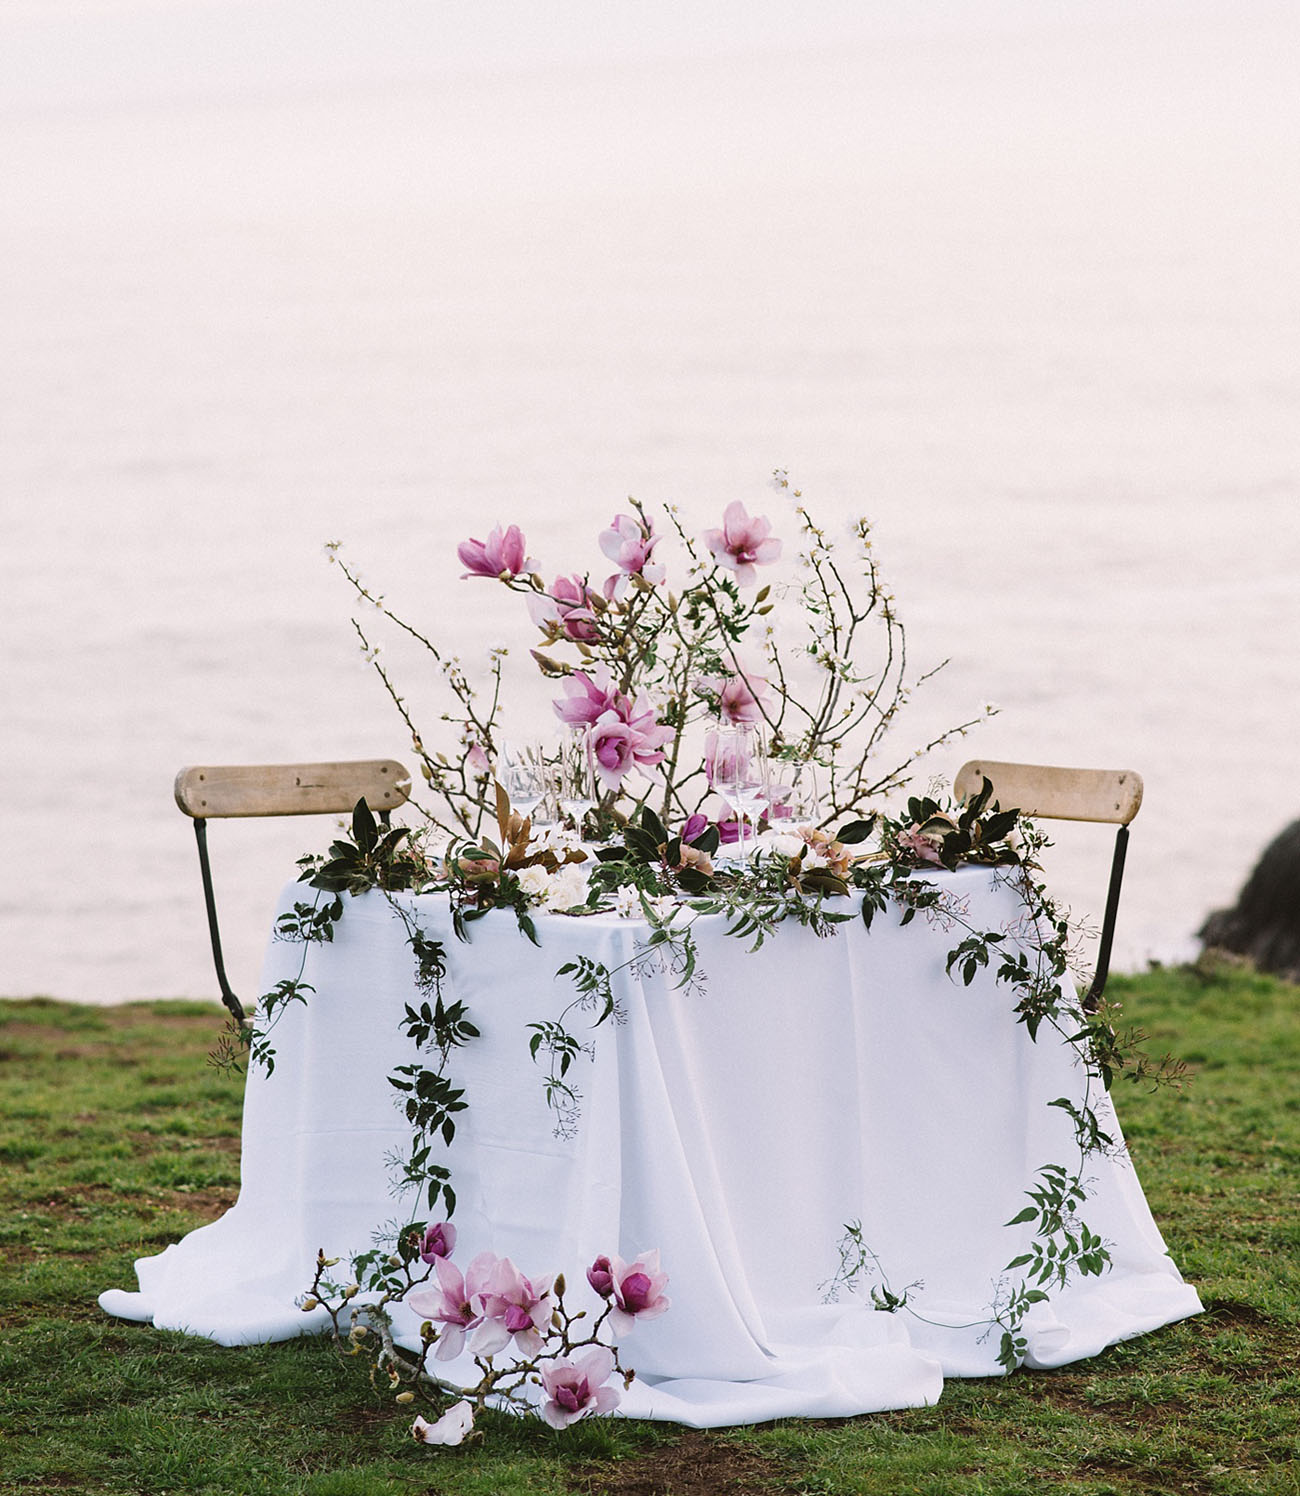 Sweetheart wedding table is decorated with lush pink florals and greenery